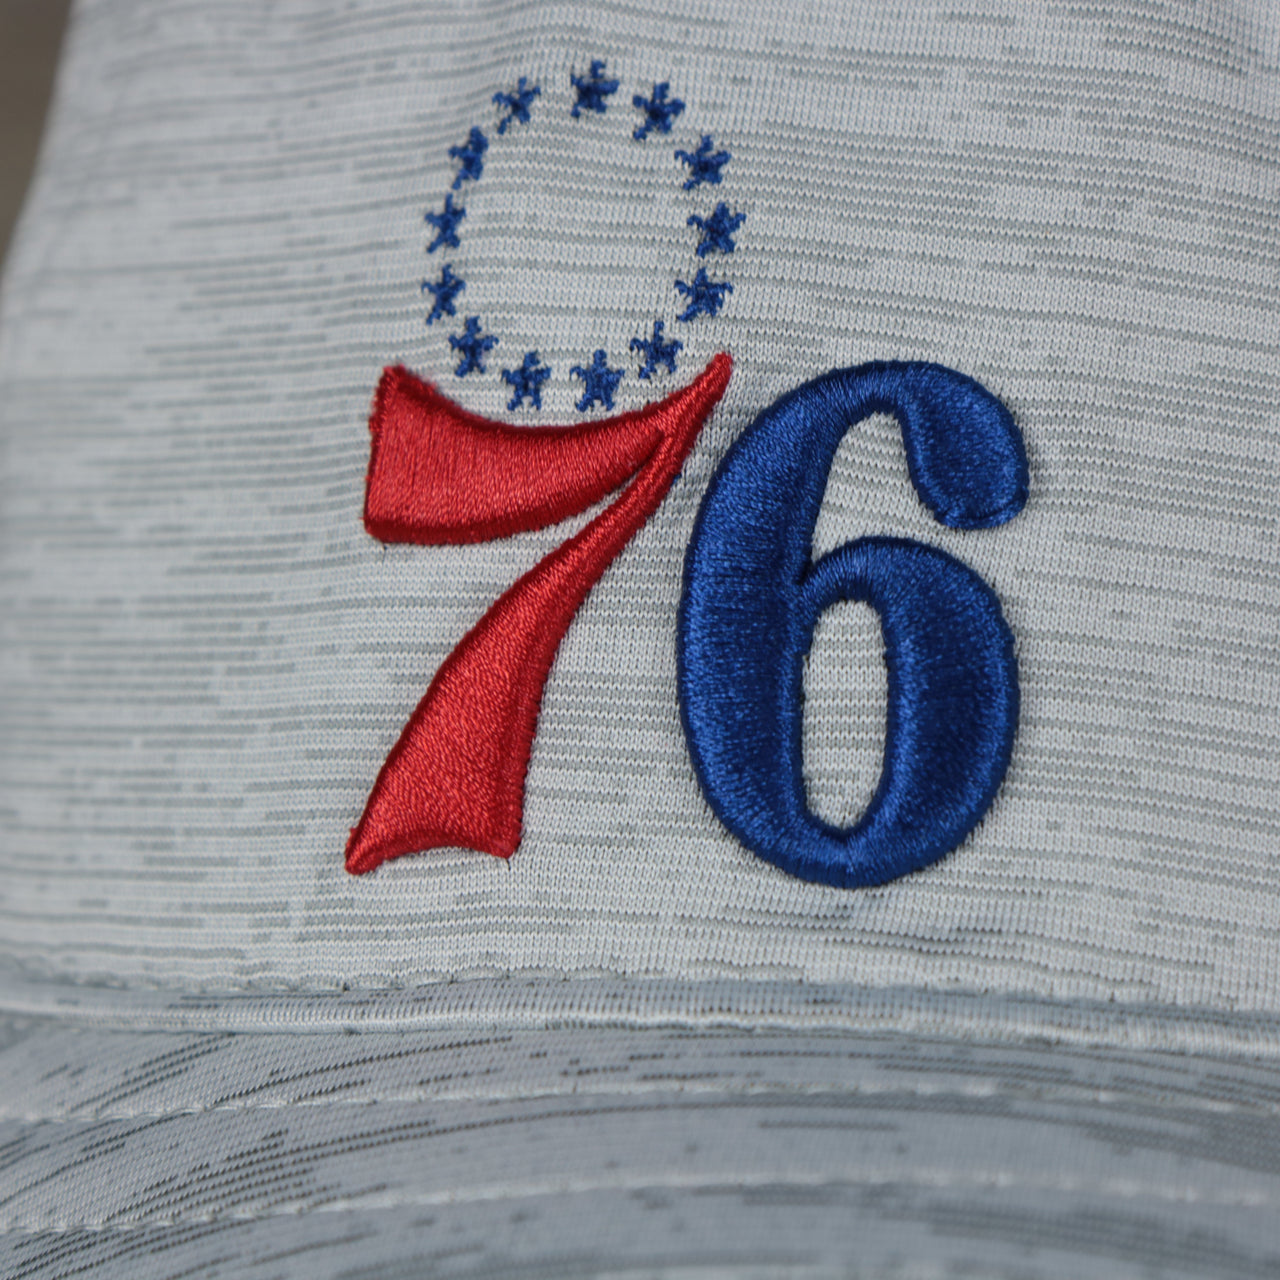 A close up of the 76ers logo on the Philadelphia 76ers New Era Bucket Hat